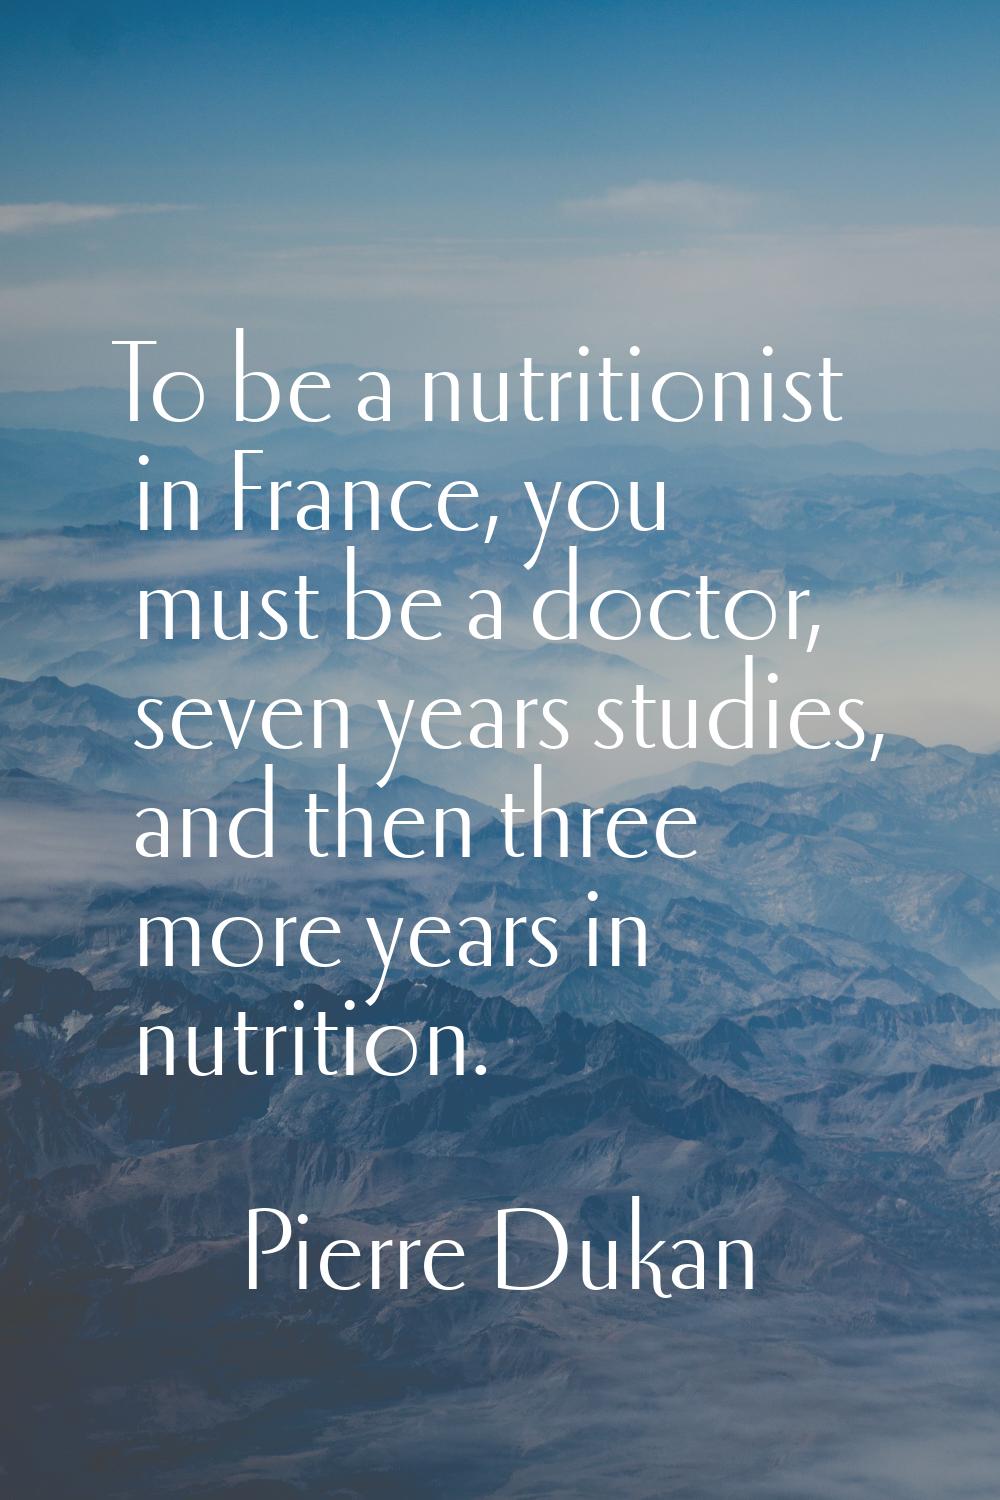 To be a nutritionist in France, you must be a doctor, seven years studies, and then three more year